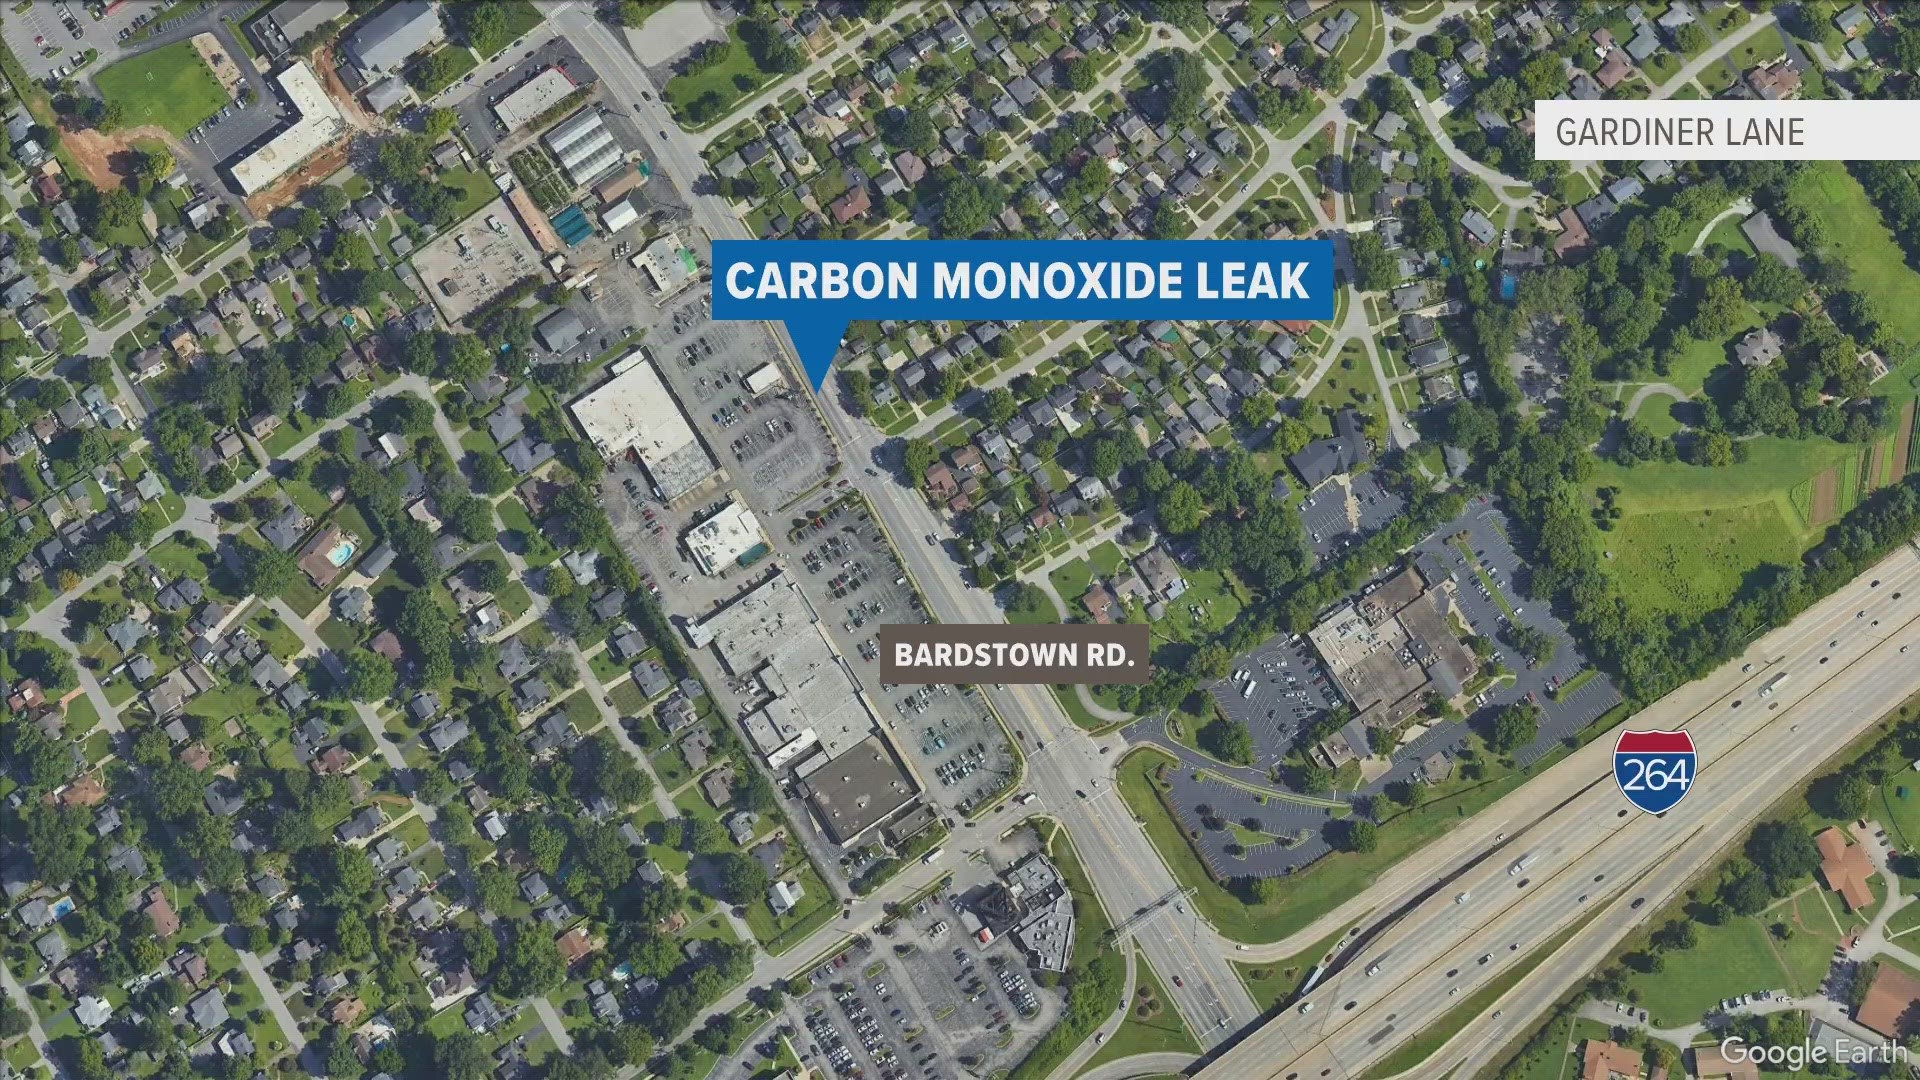 According to Louisville Fire (LFD) officials, crews were dispatched to the 3000 block of Bardstown Road at 11:30 a.m. on reports of a possible gas leak.